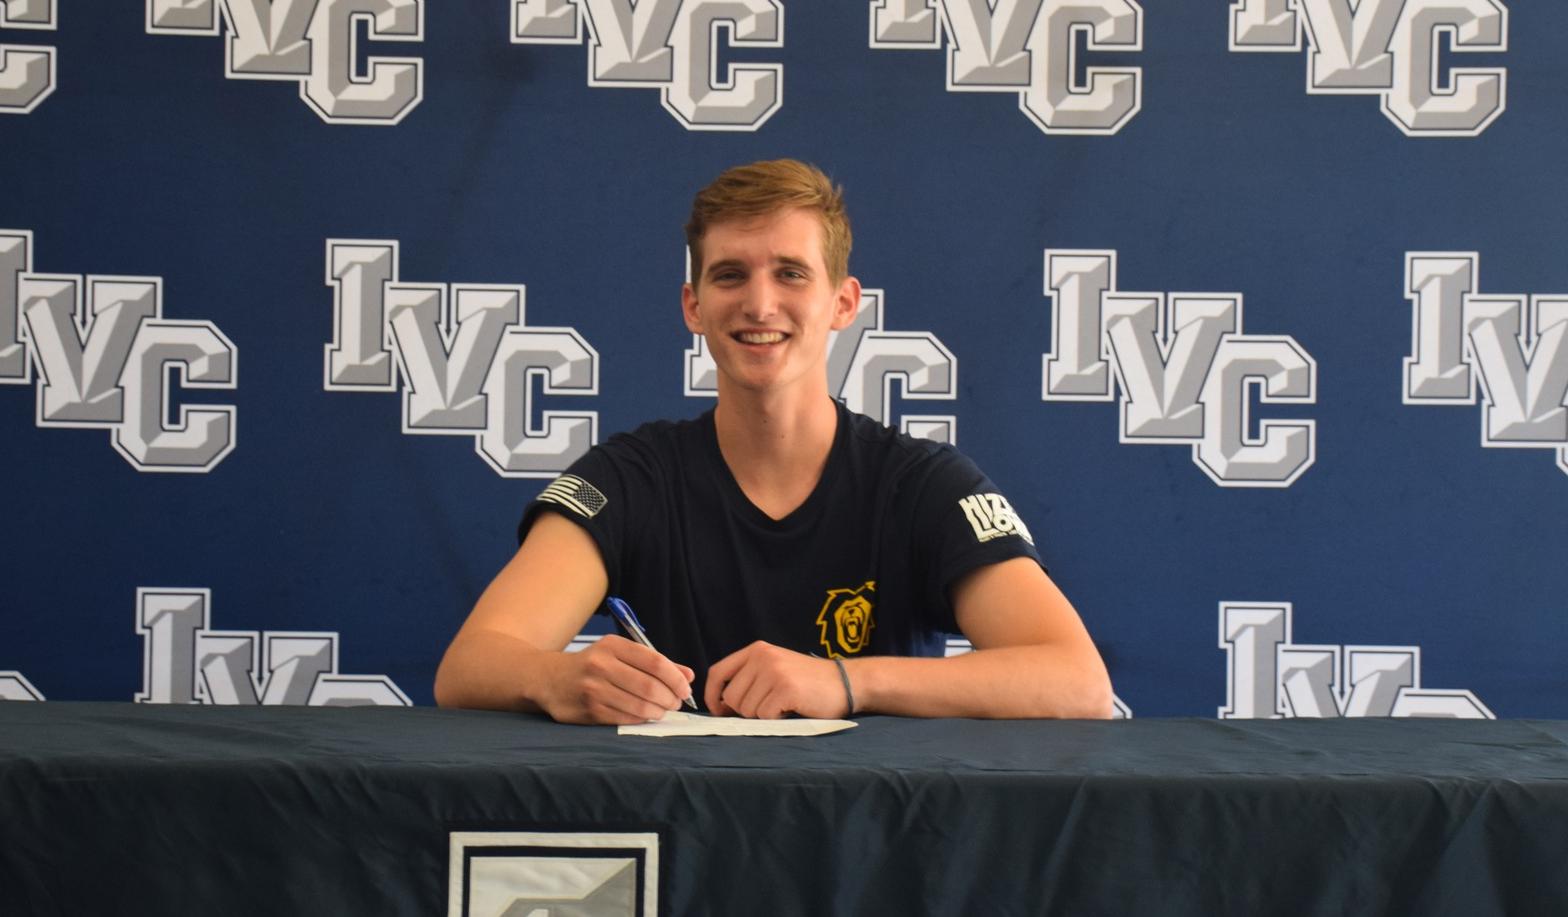 Men's volleyball player Declan Holder signs with Vanguard